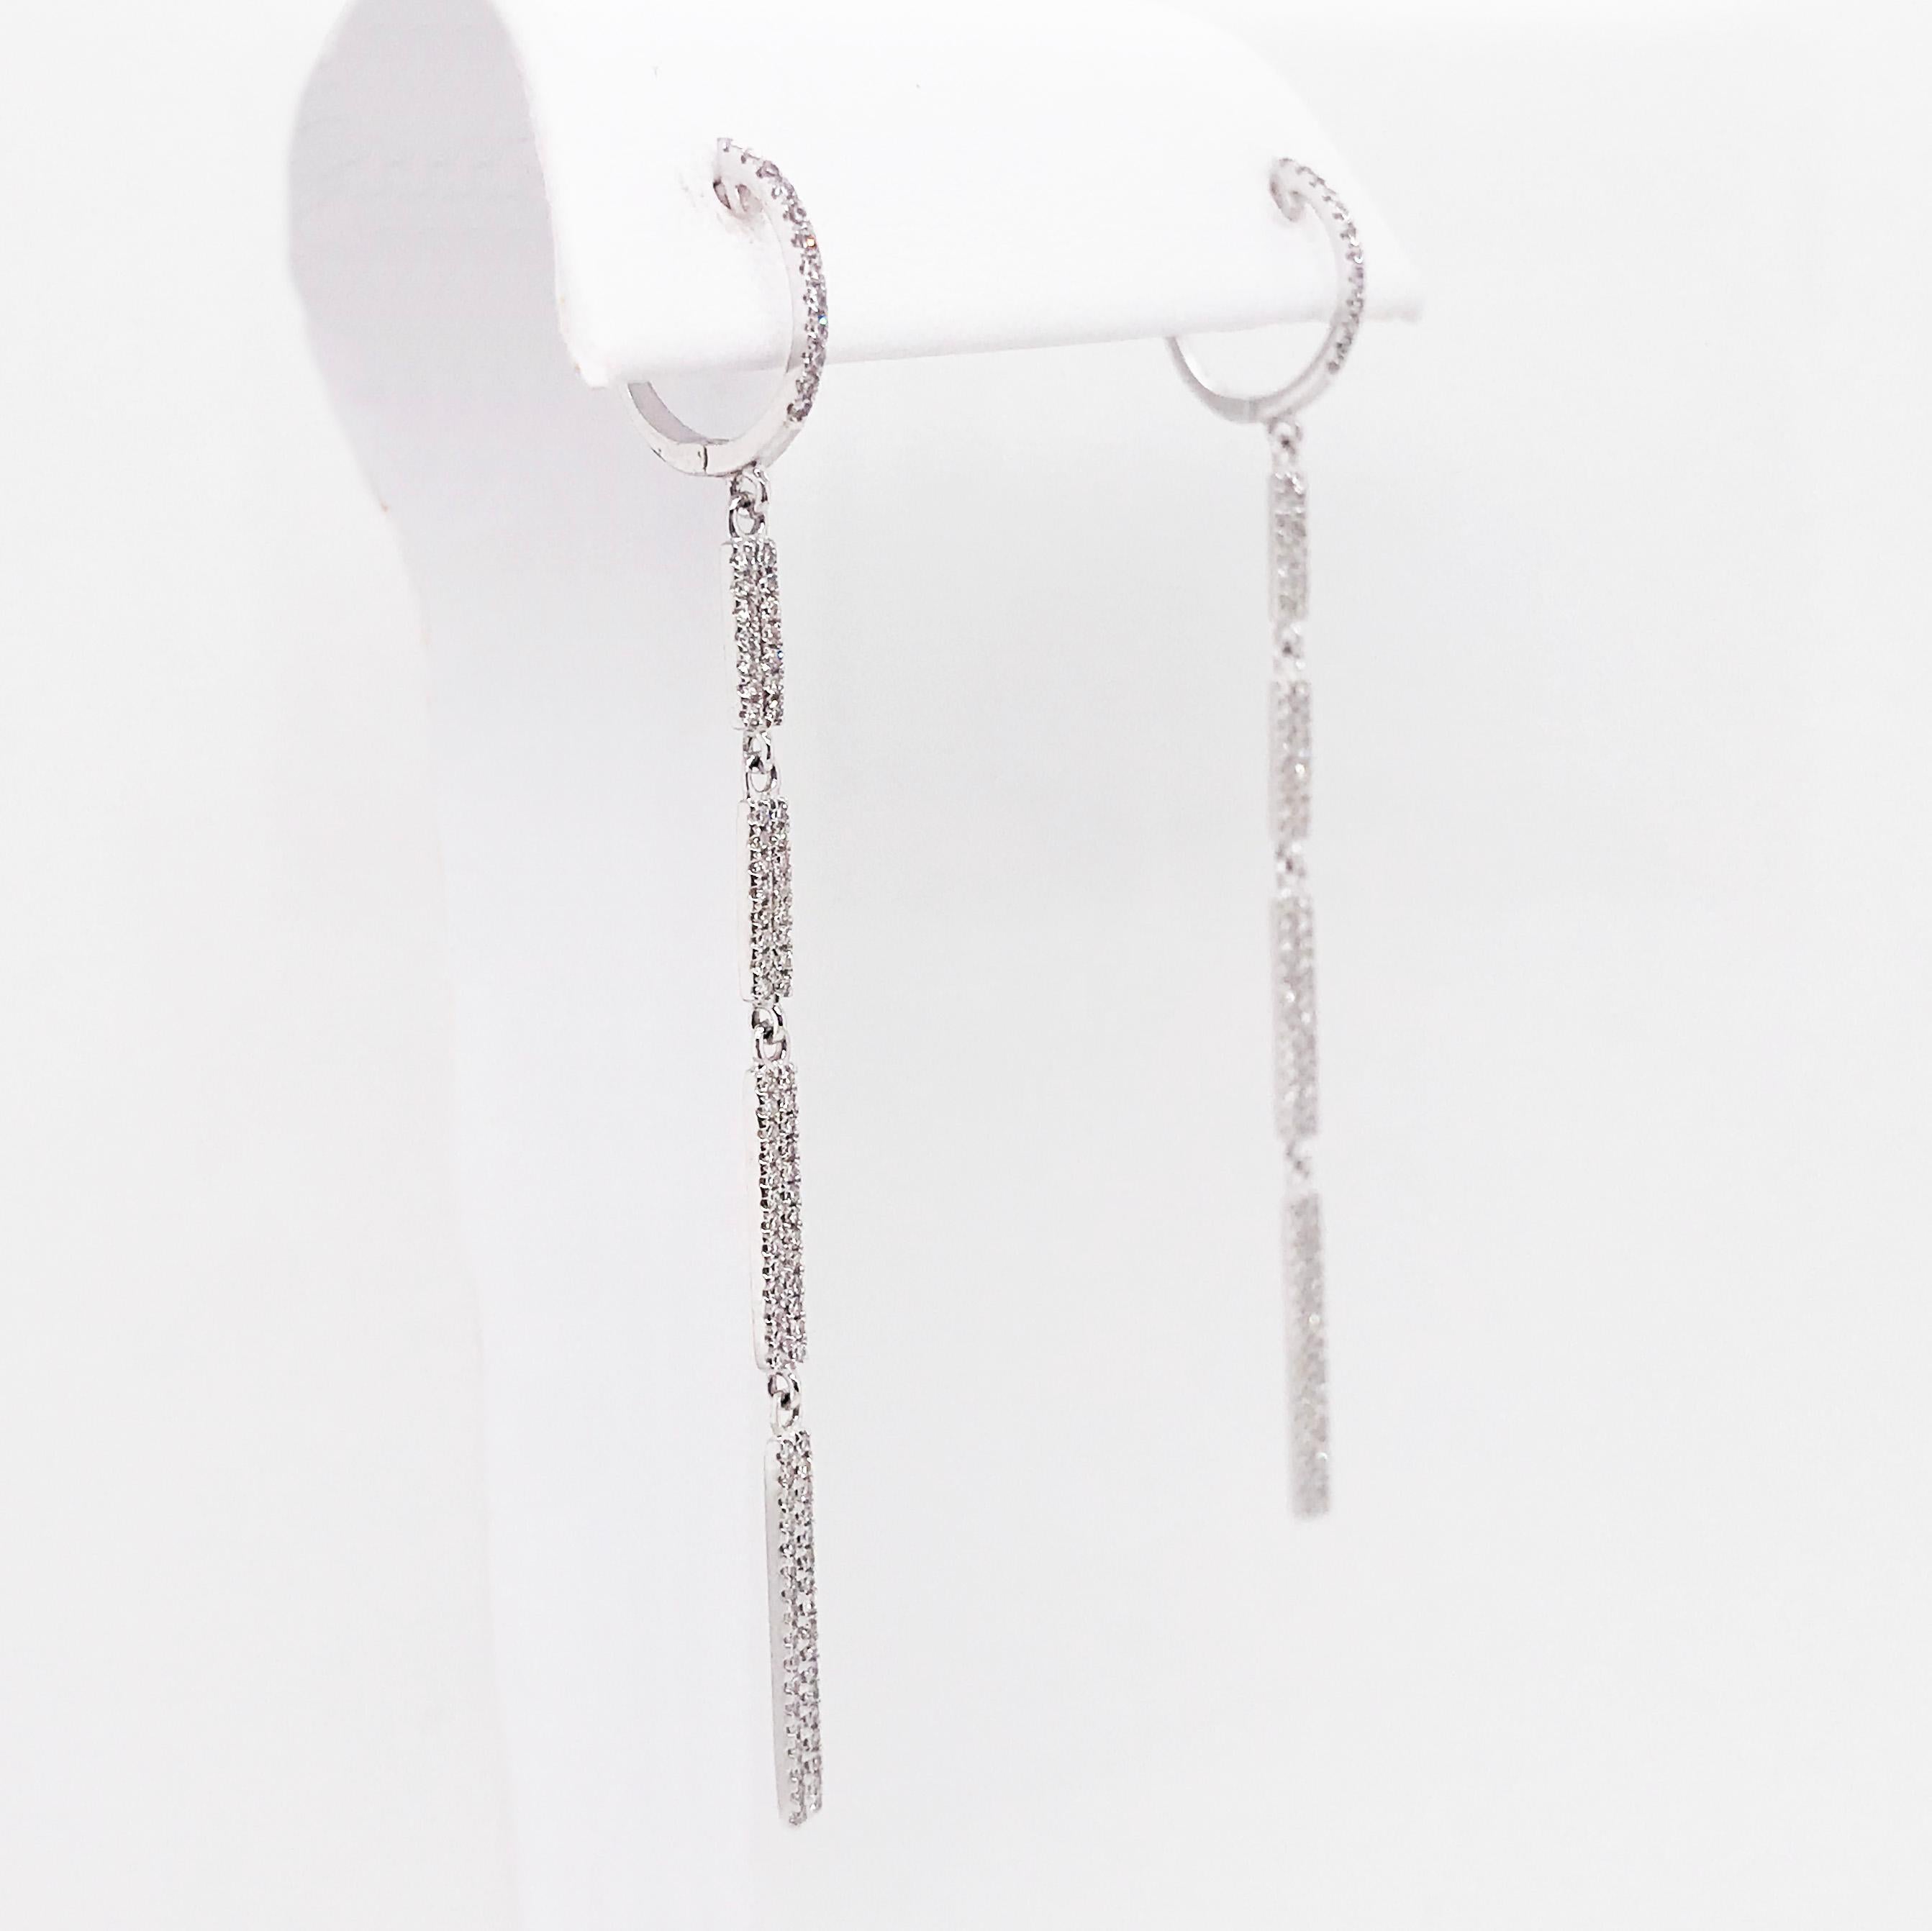 The diamond bar dangle earrings are modern and gorgeous. With four pave diamond bars linked together to created a dynamic movement that moves with you perfectly. Each bar has round brilliant diamonds pave set in two rows across the top. The earrings